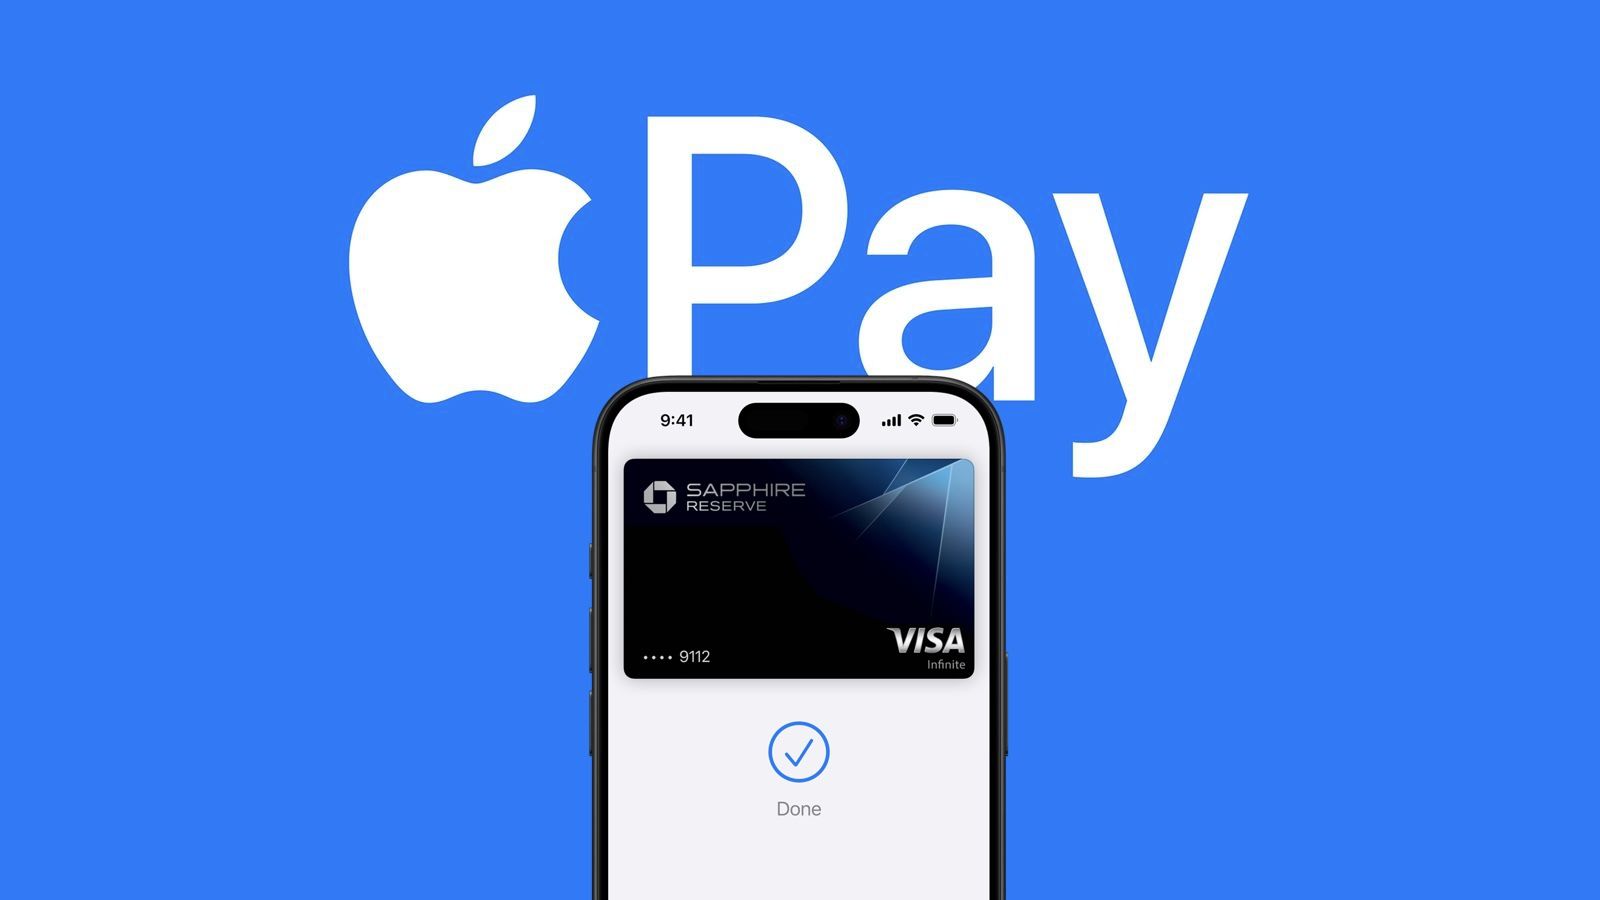 Apple Offers to Open NFC Payment Technology to Third-Party